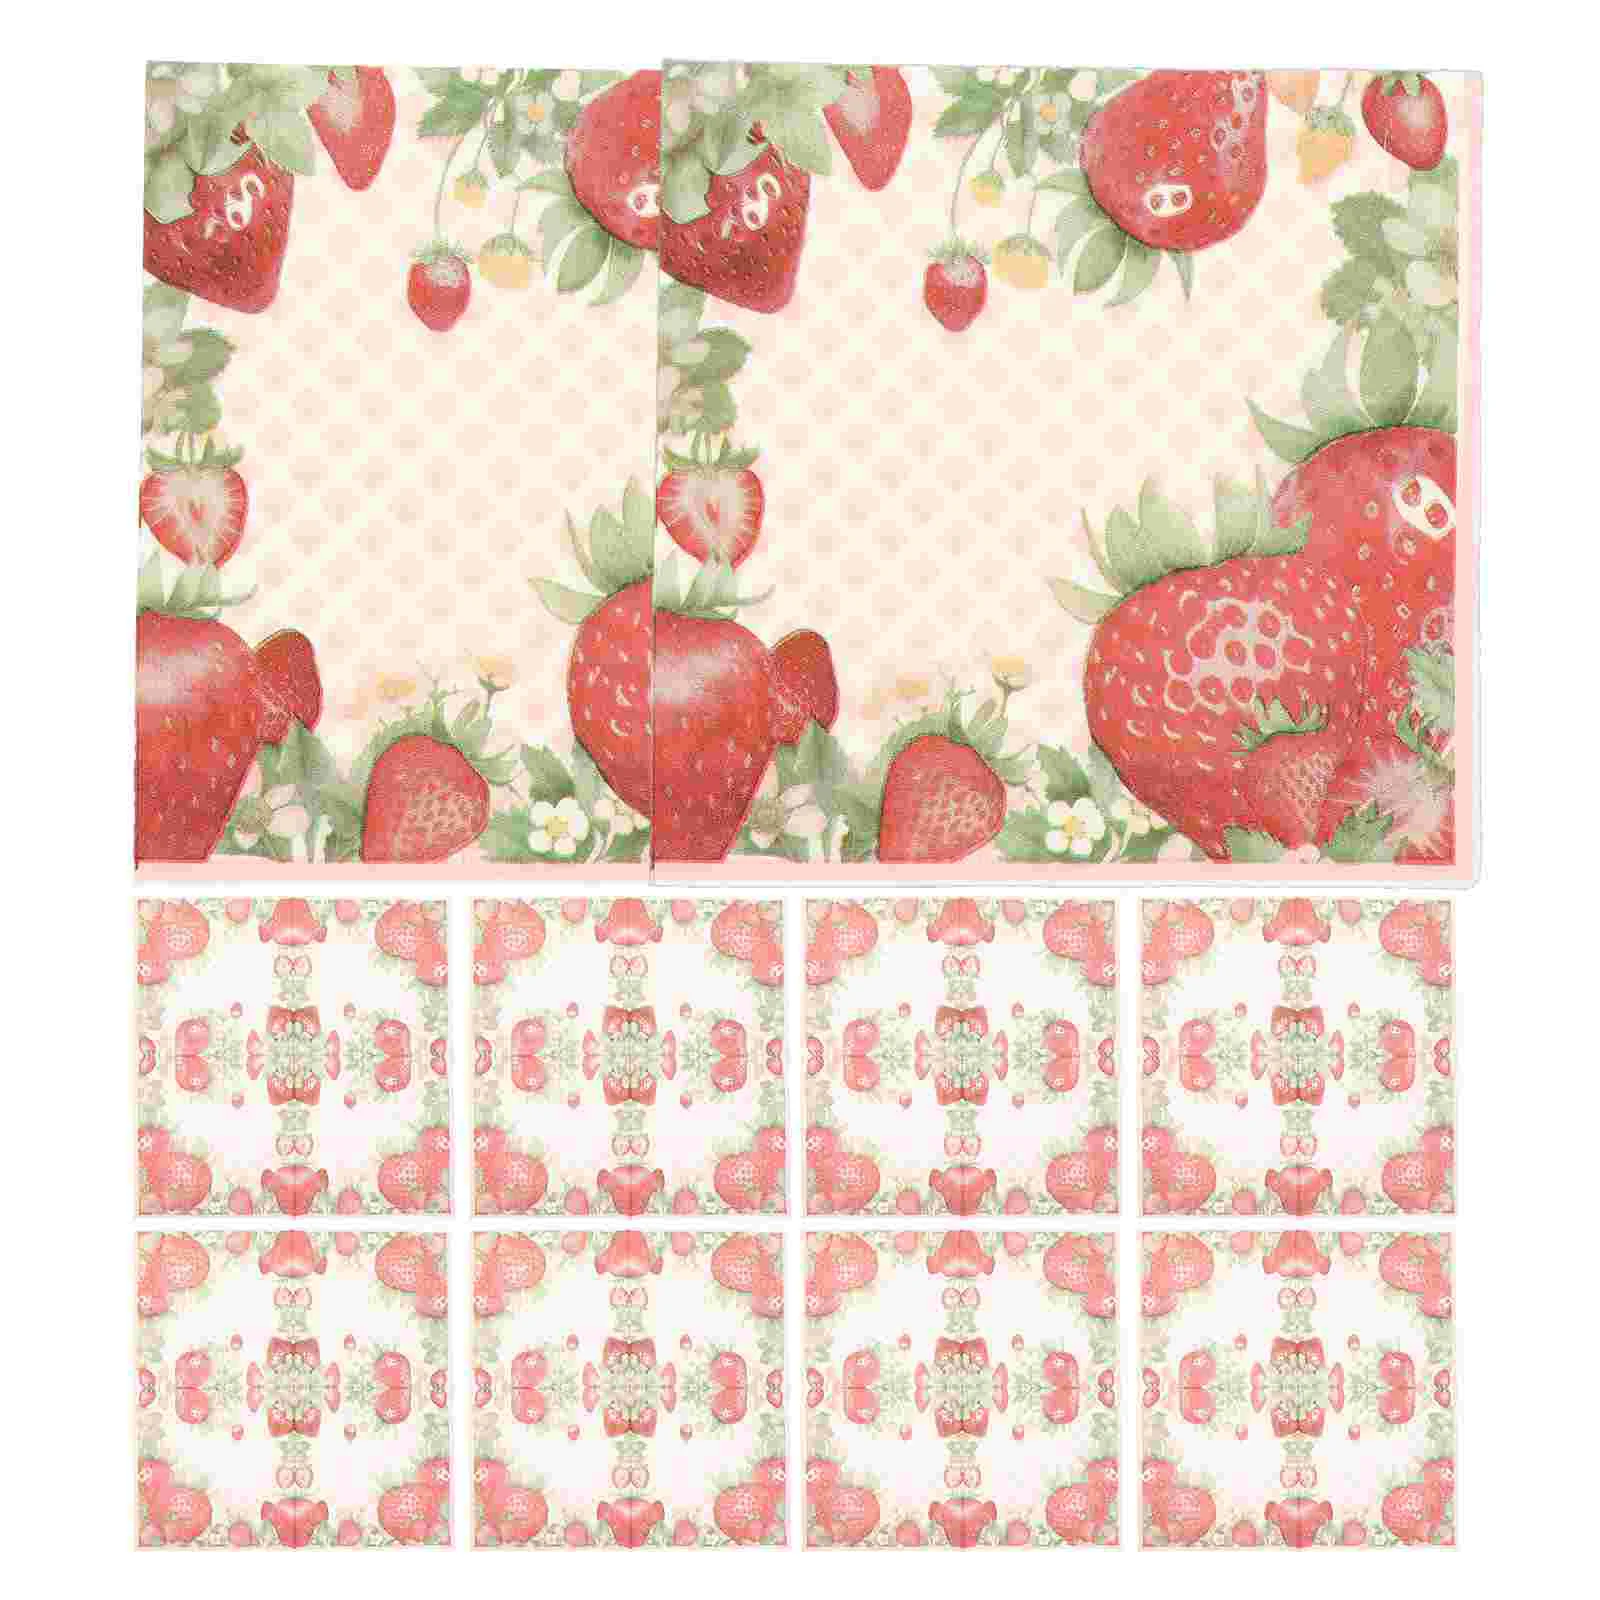 

20 Sheets Colorful Napkins Paper Dinner Decorative Tru Fru Strawberries Household Strawberry Printing Party Wood Pulp Table